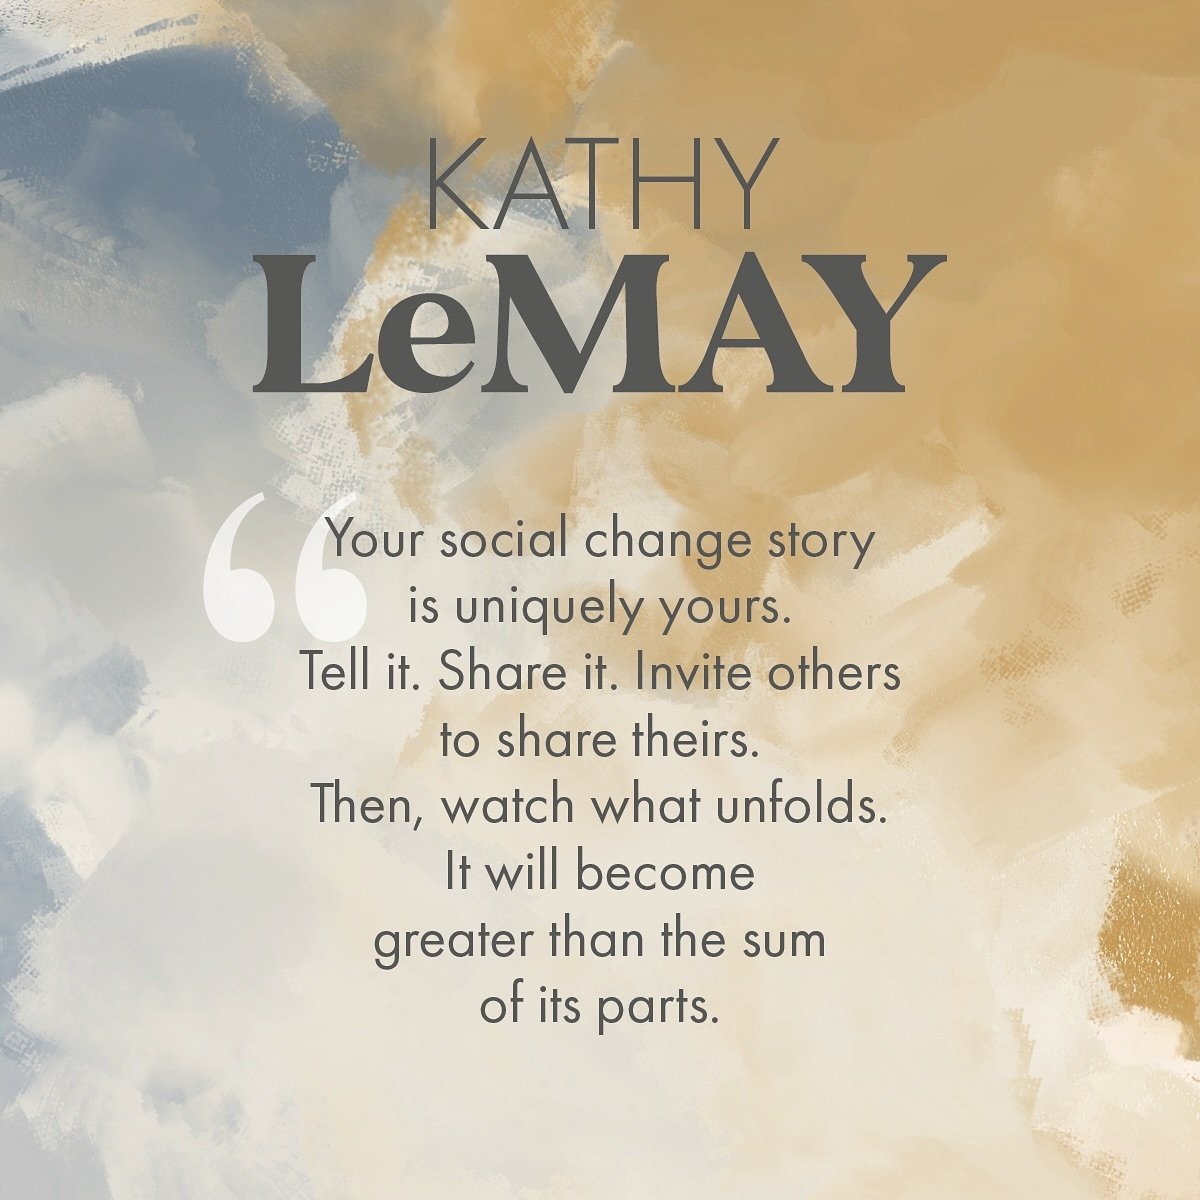 💡 We wanted to start out our week circling on the thoughts, words, energy and wisdom of Kathy LeMay. This is only one *sound bite* from four hours of incredible, personalized training. For those of you who were able to attend: what words stuck with 